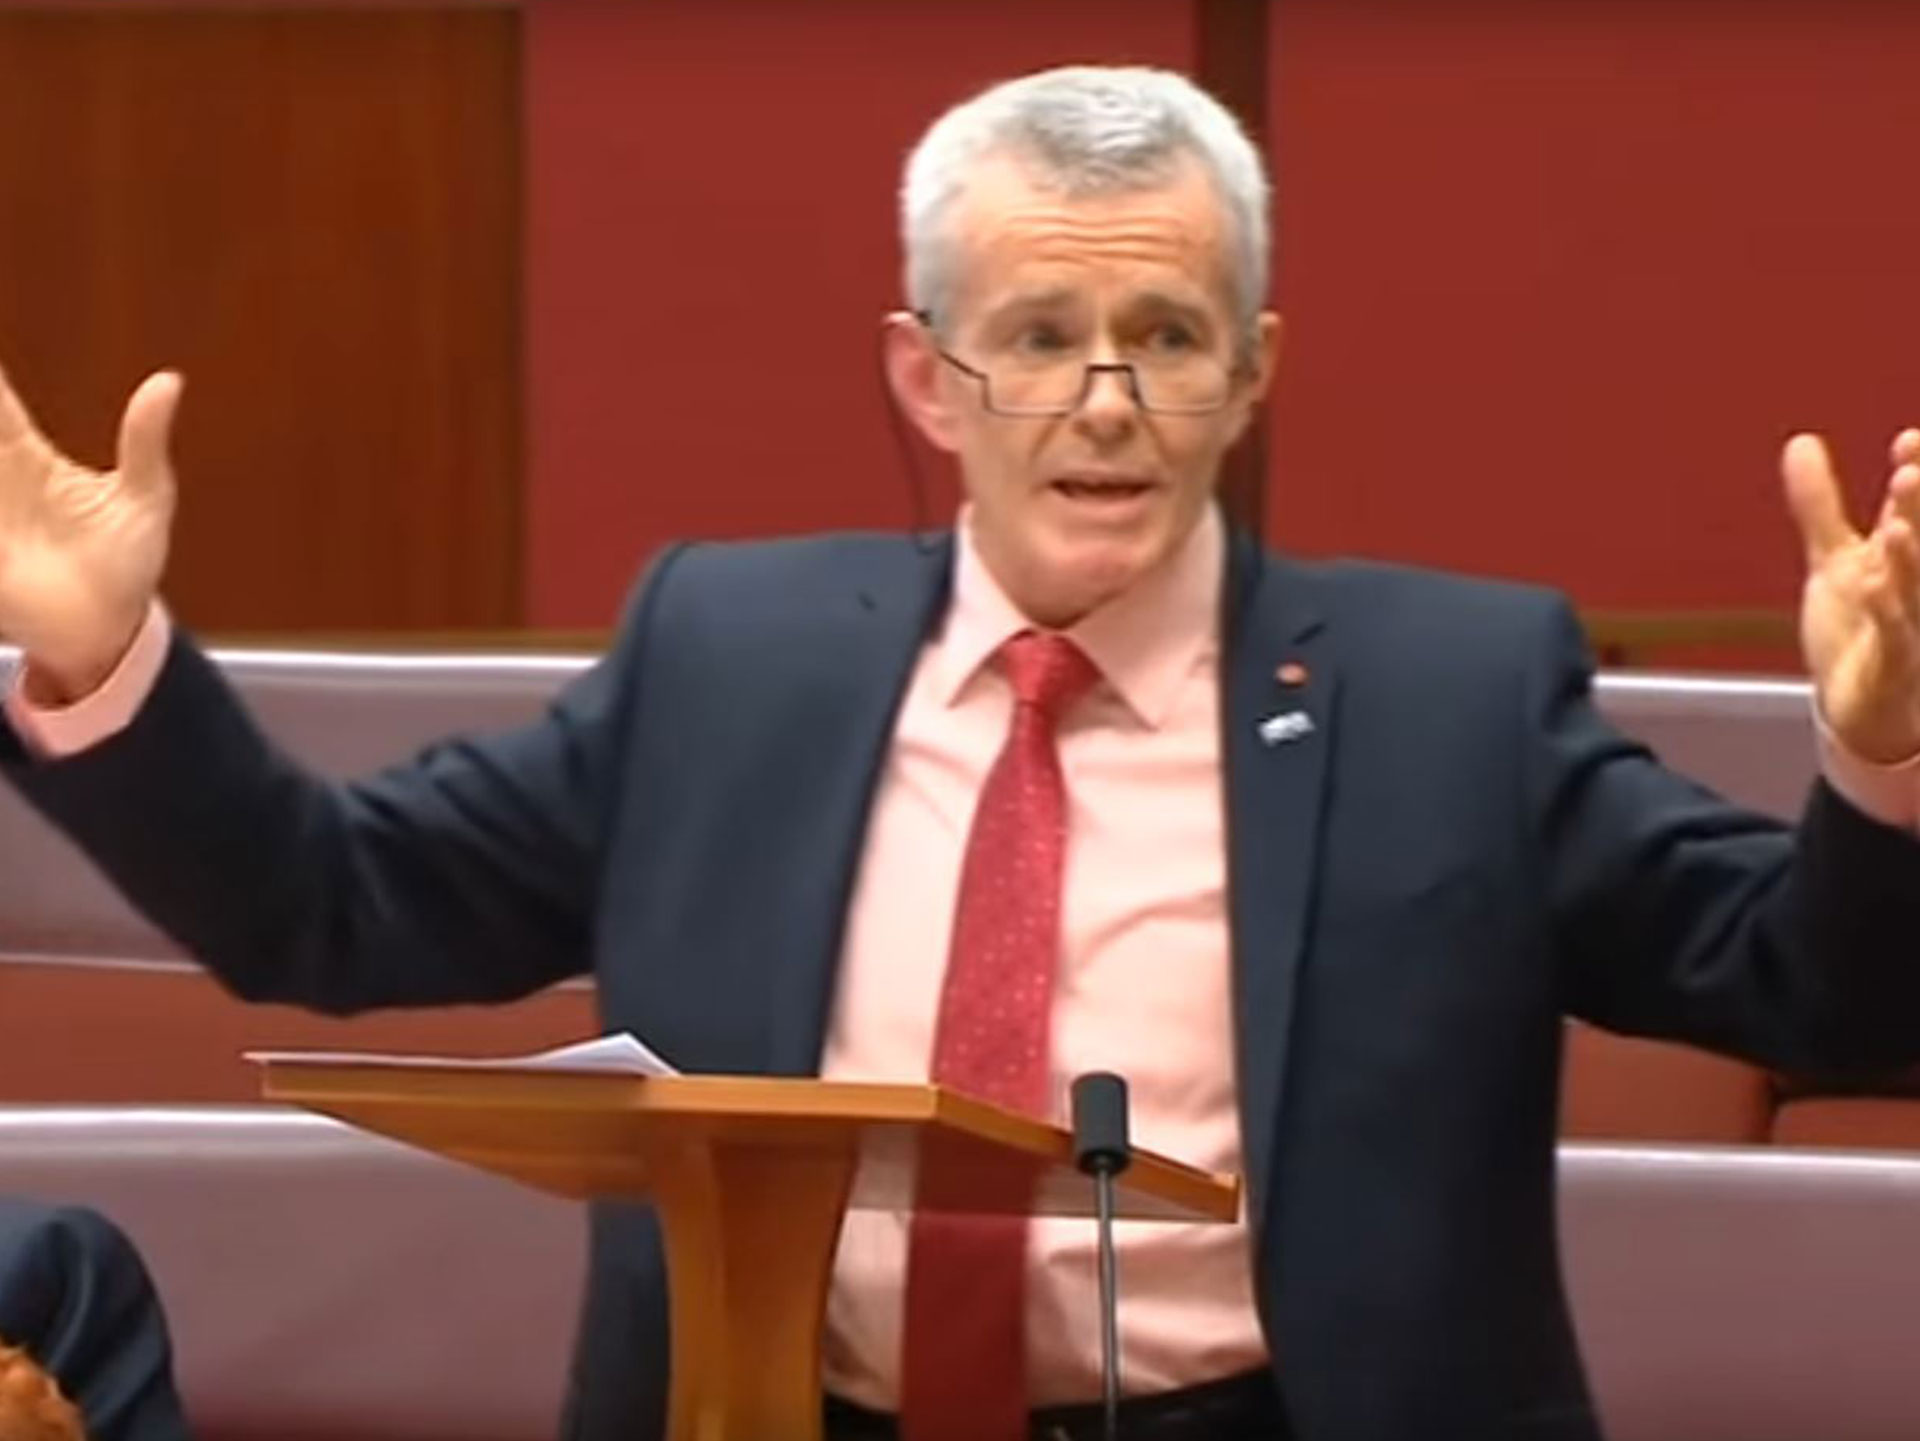 One Nation senator says some girls like being "wolf-whistled"